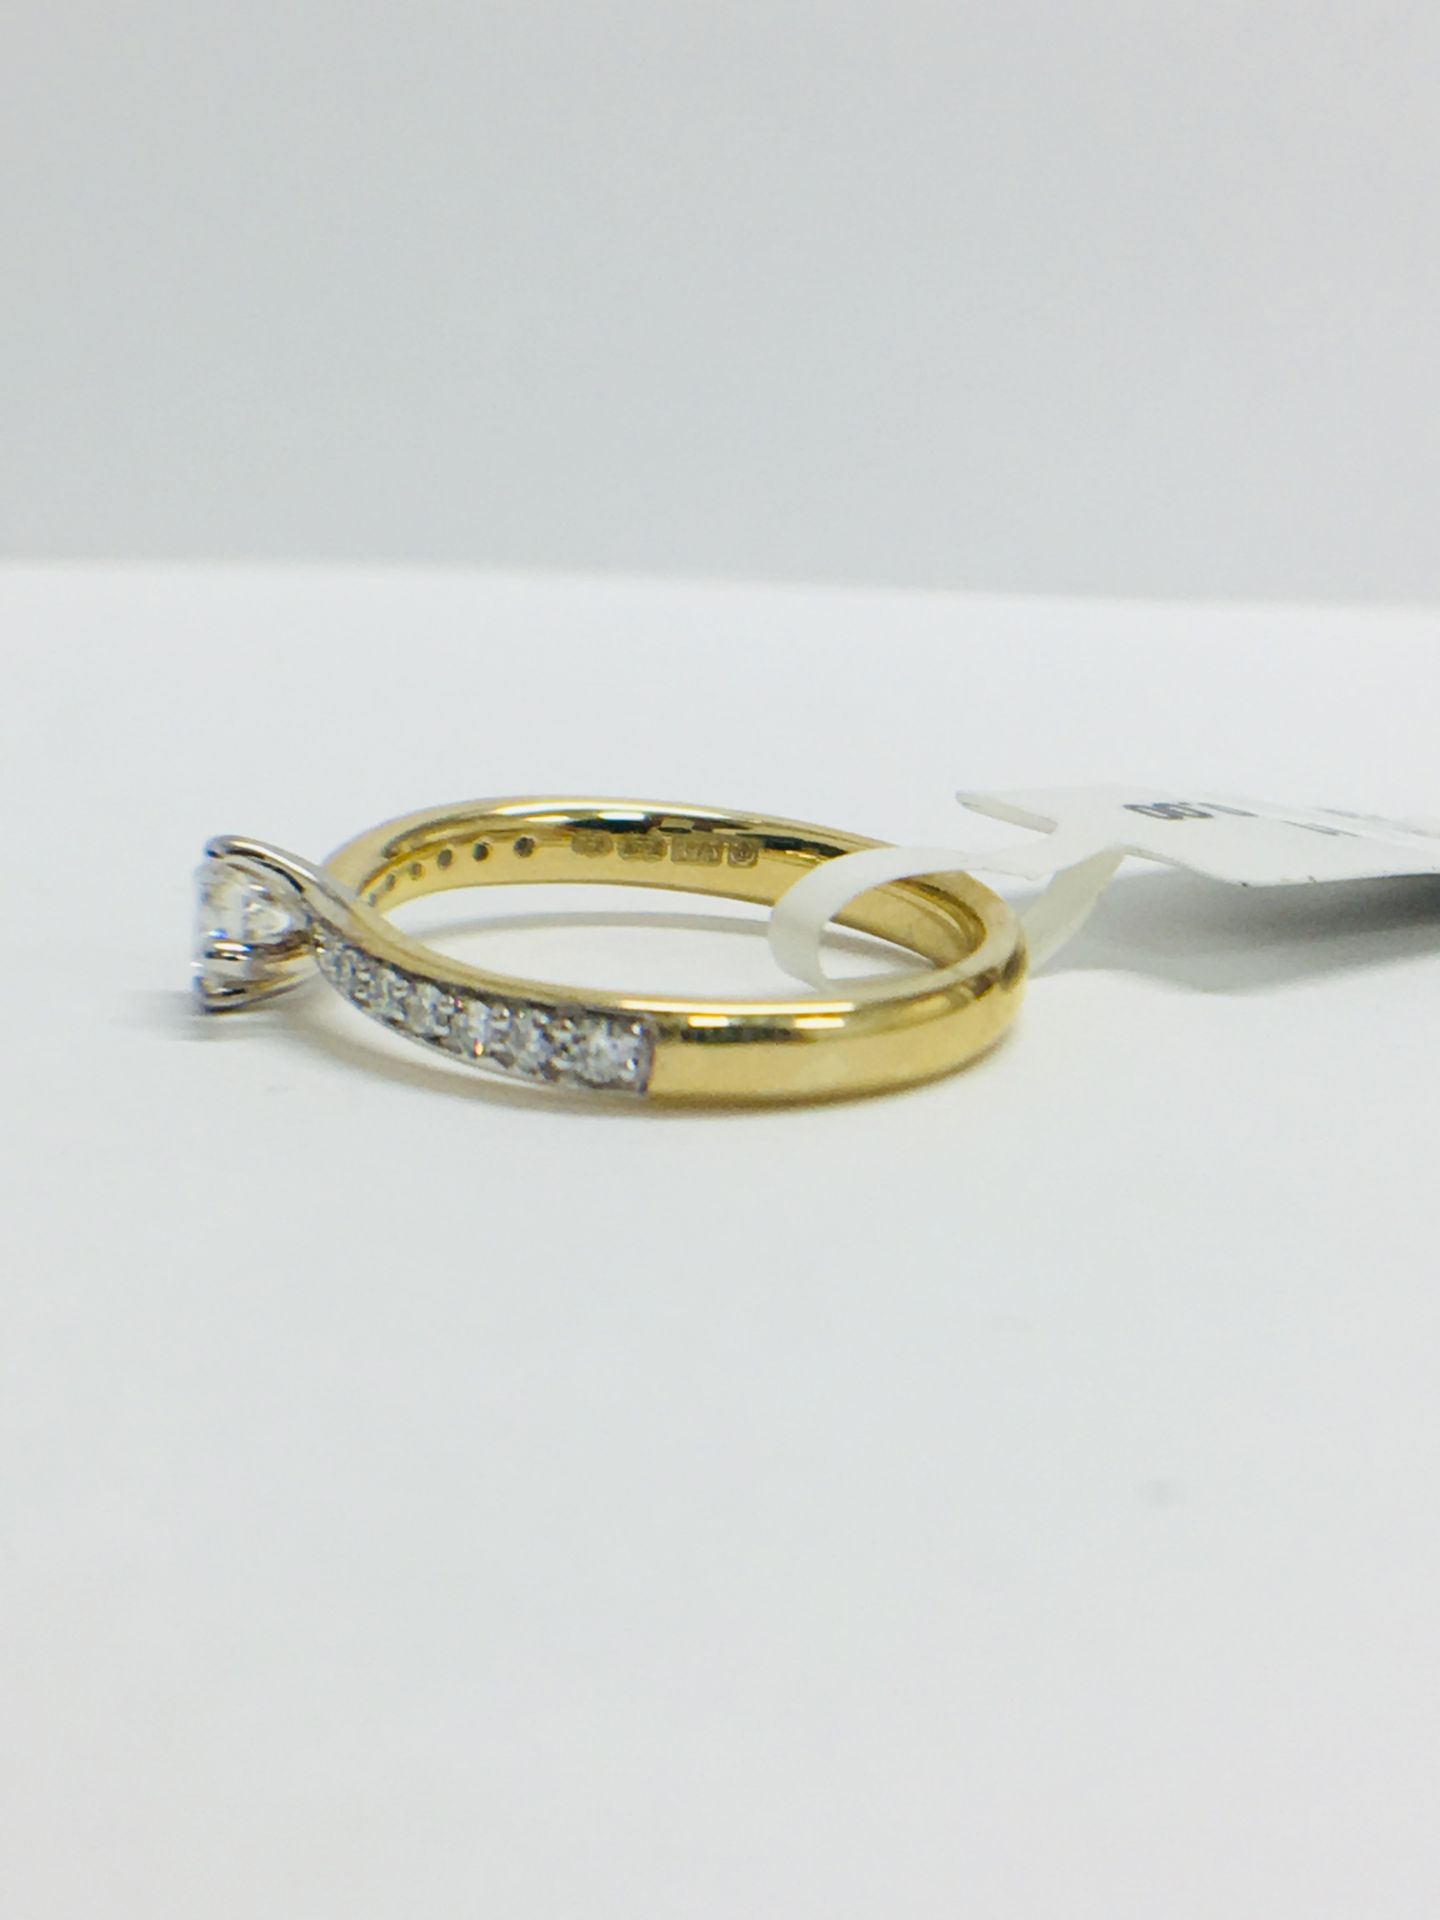 9ct Yellow Gold diamond Solitaire twist style ring - Image 4 of 11